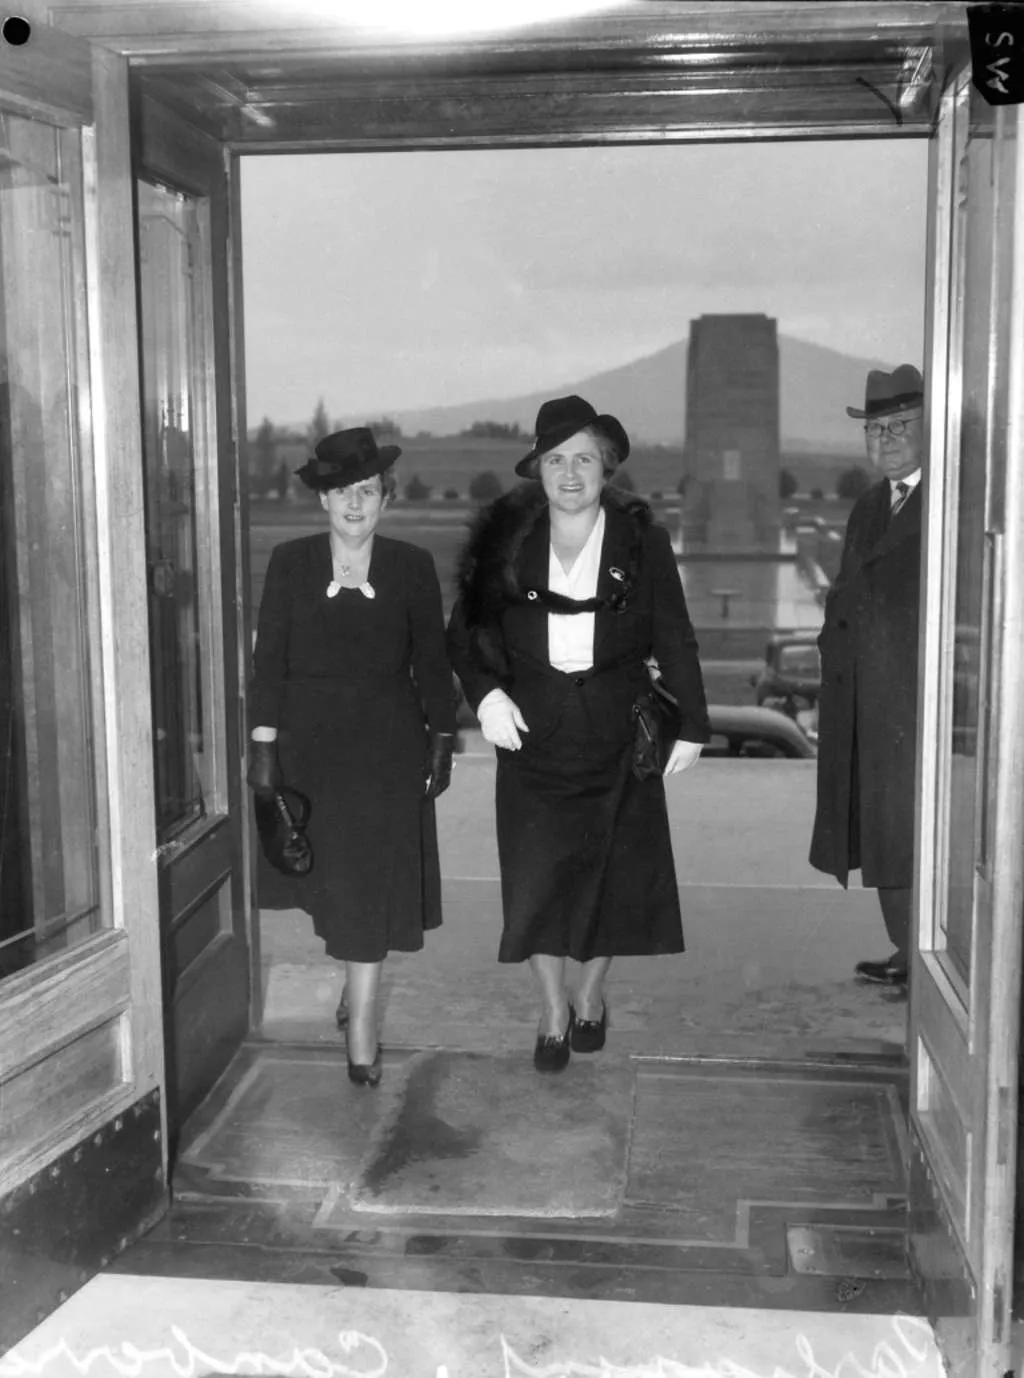 Dorothy Tangney and Enid Lyons walk through the front door of Old Parliament House together in 1943 smiling. 